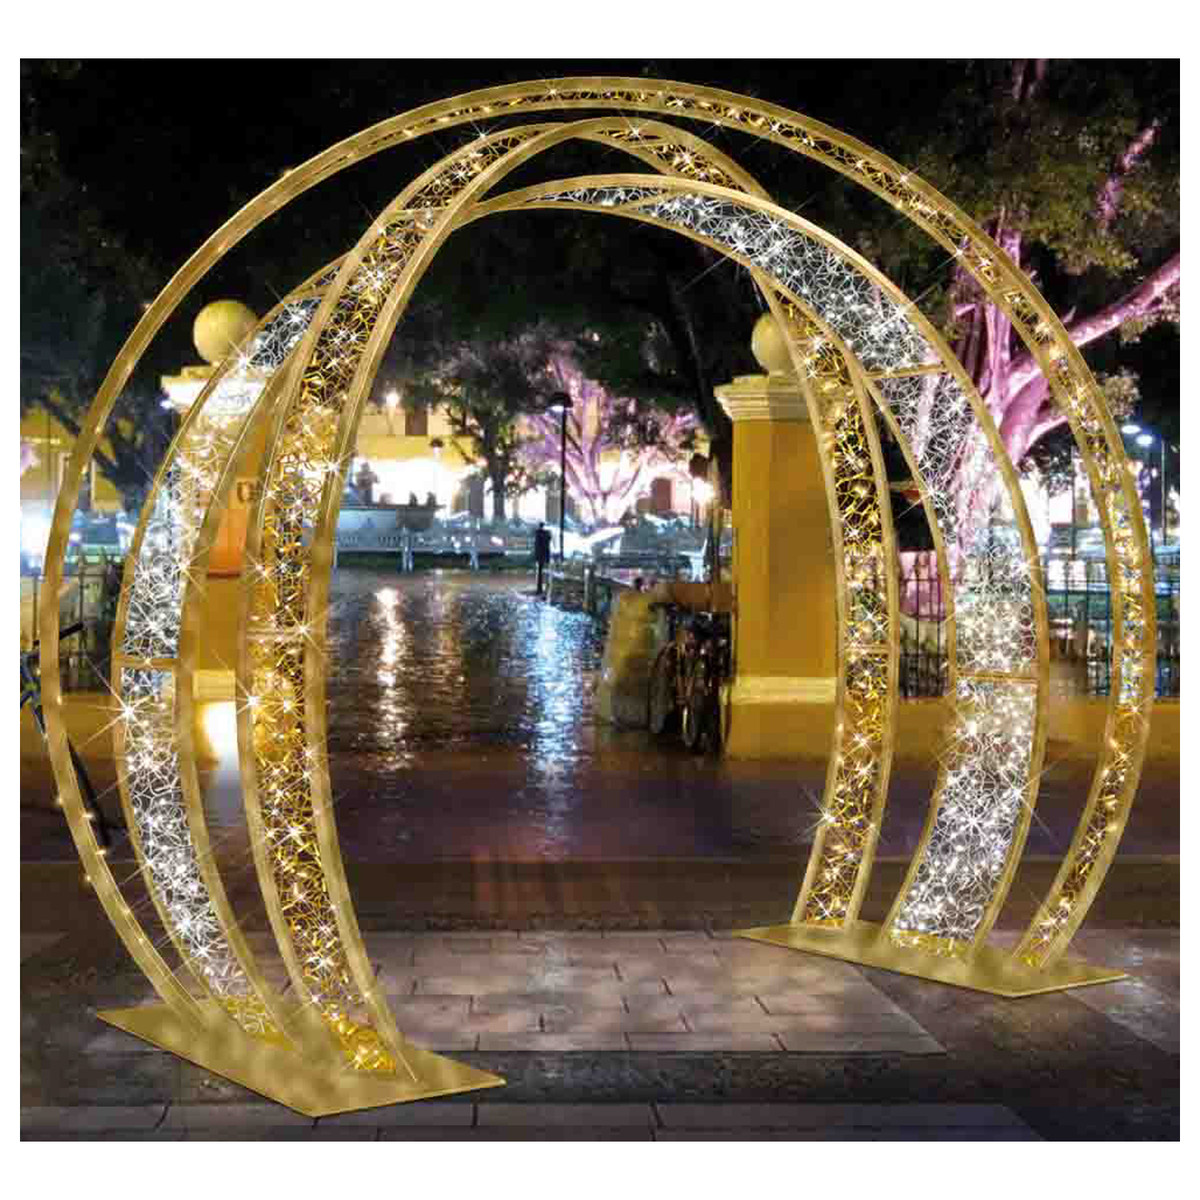 3D Walkthrough Arch - Large Commercial Display - Three Ring Knitted - LED Lights - 11.5ft tall